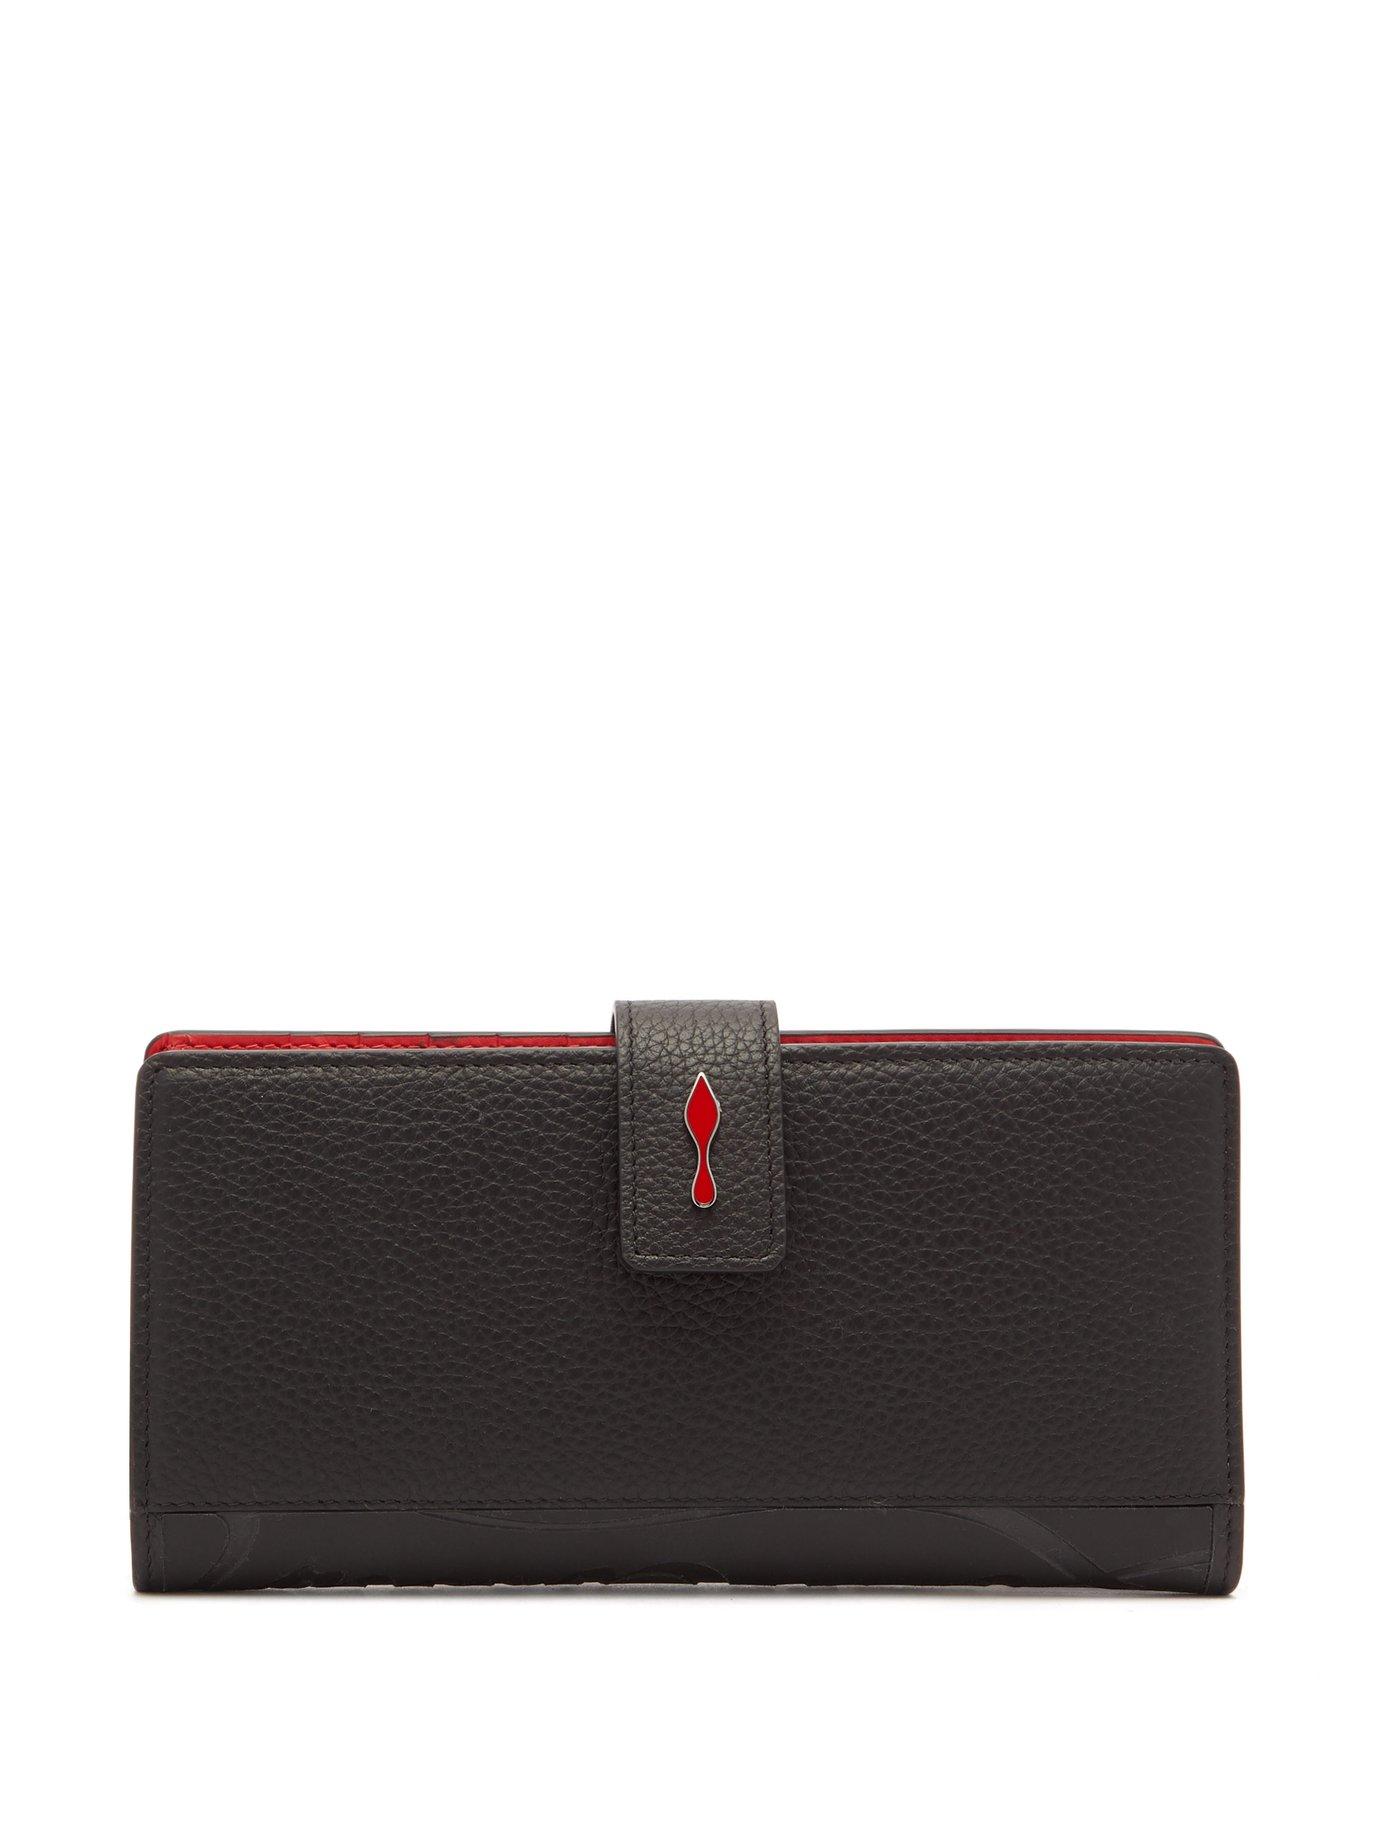 Christian Louboutin Paloma Continental Leather Wallet in Black 